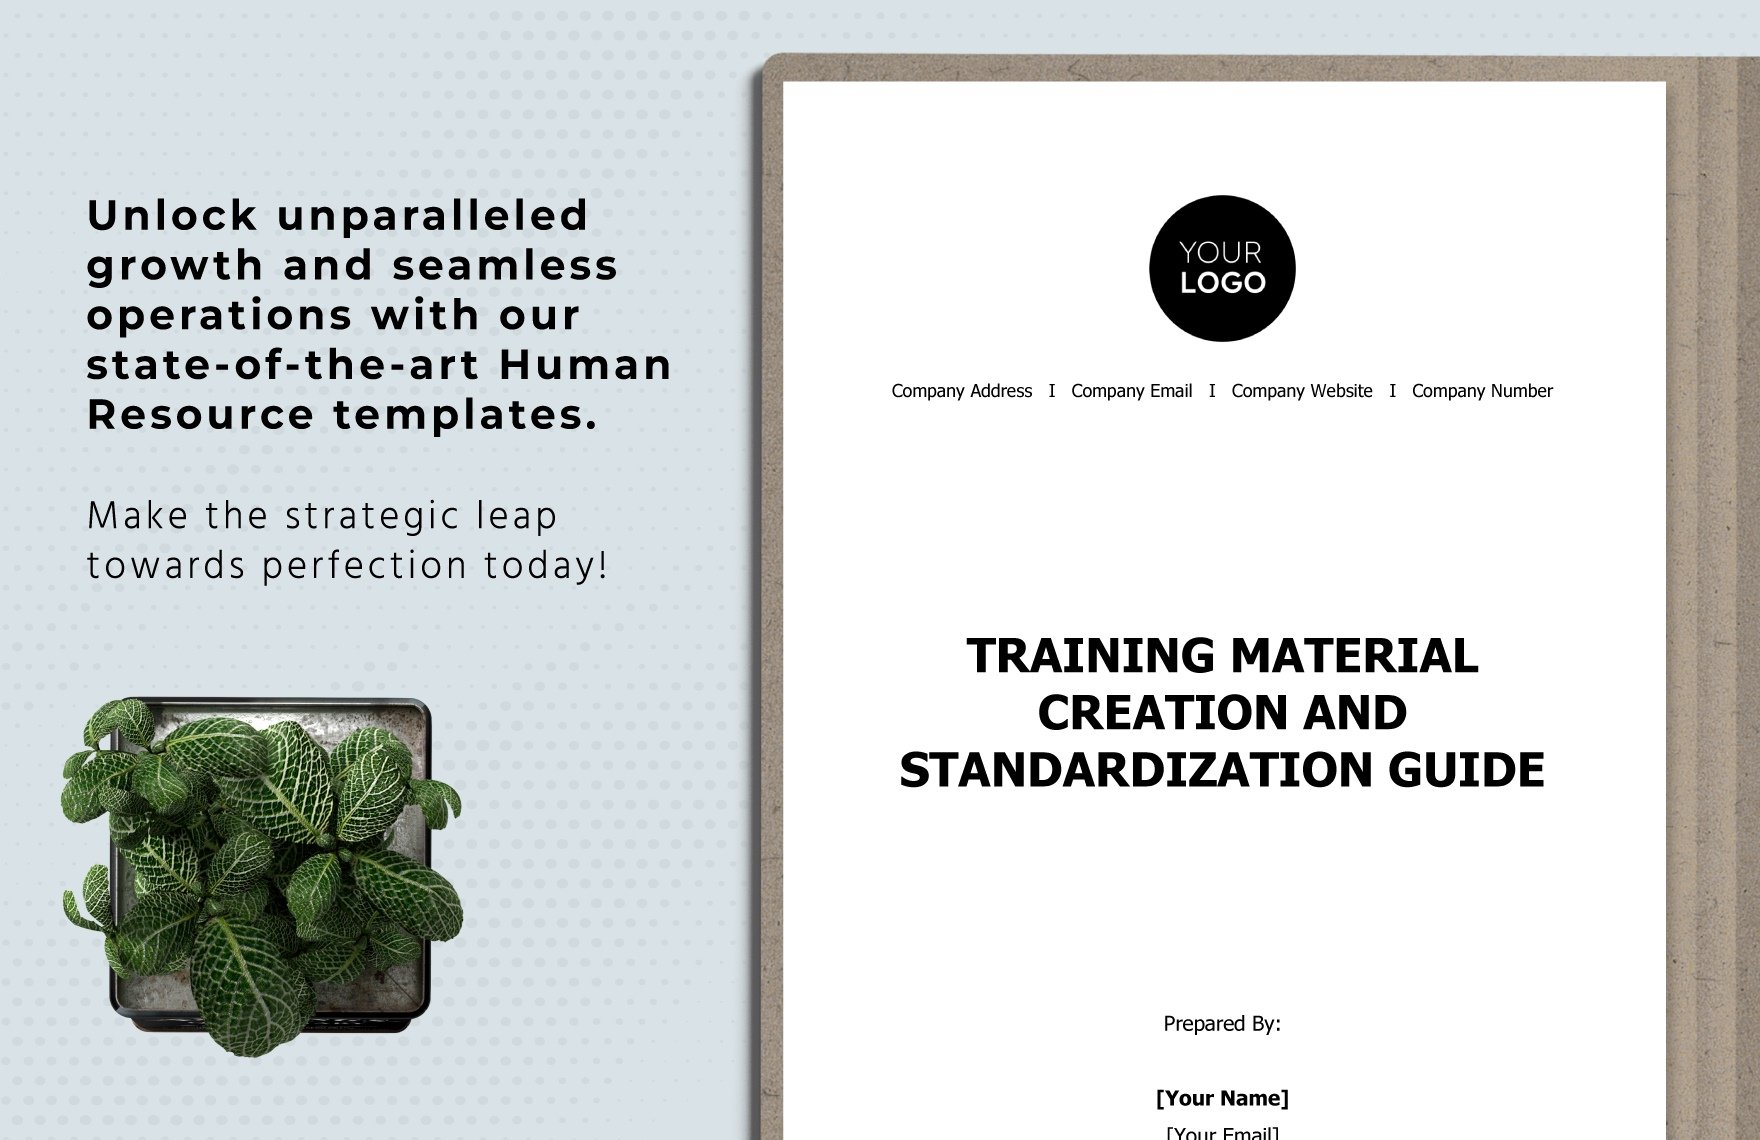 Training Material Creation & Standardization Guide HR Template